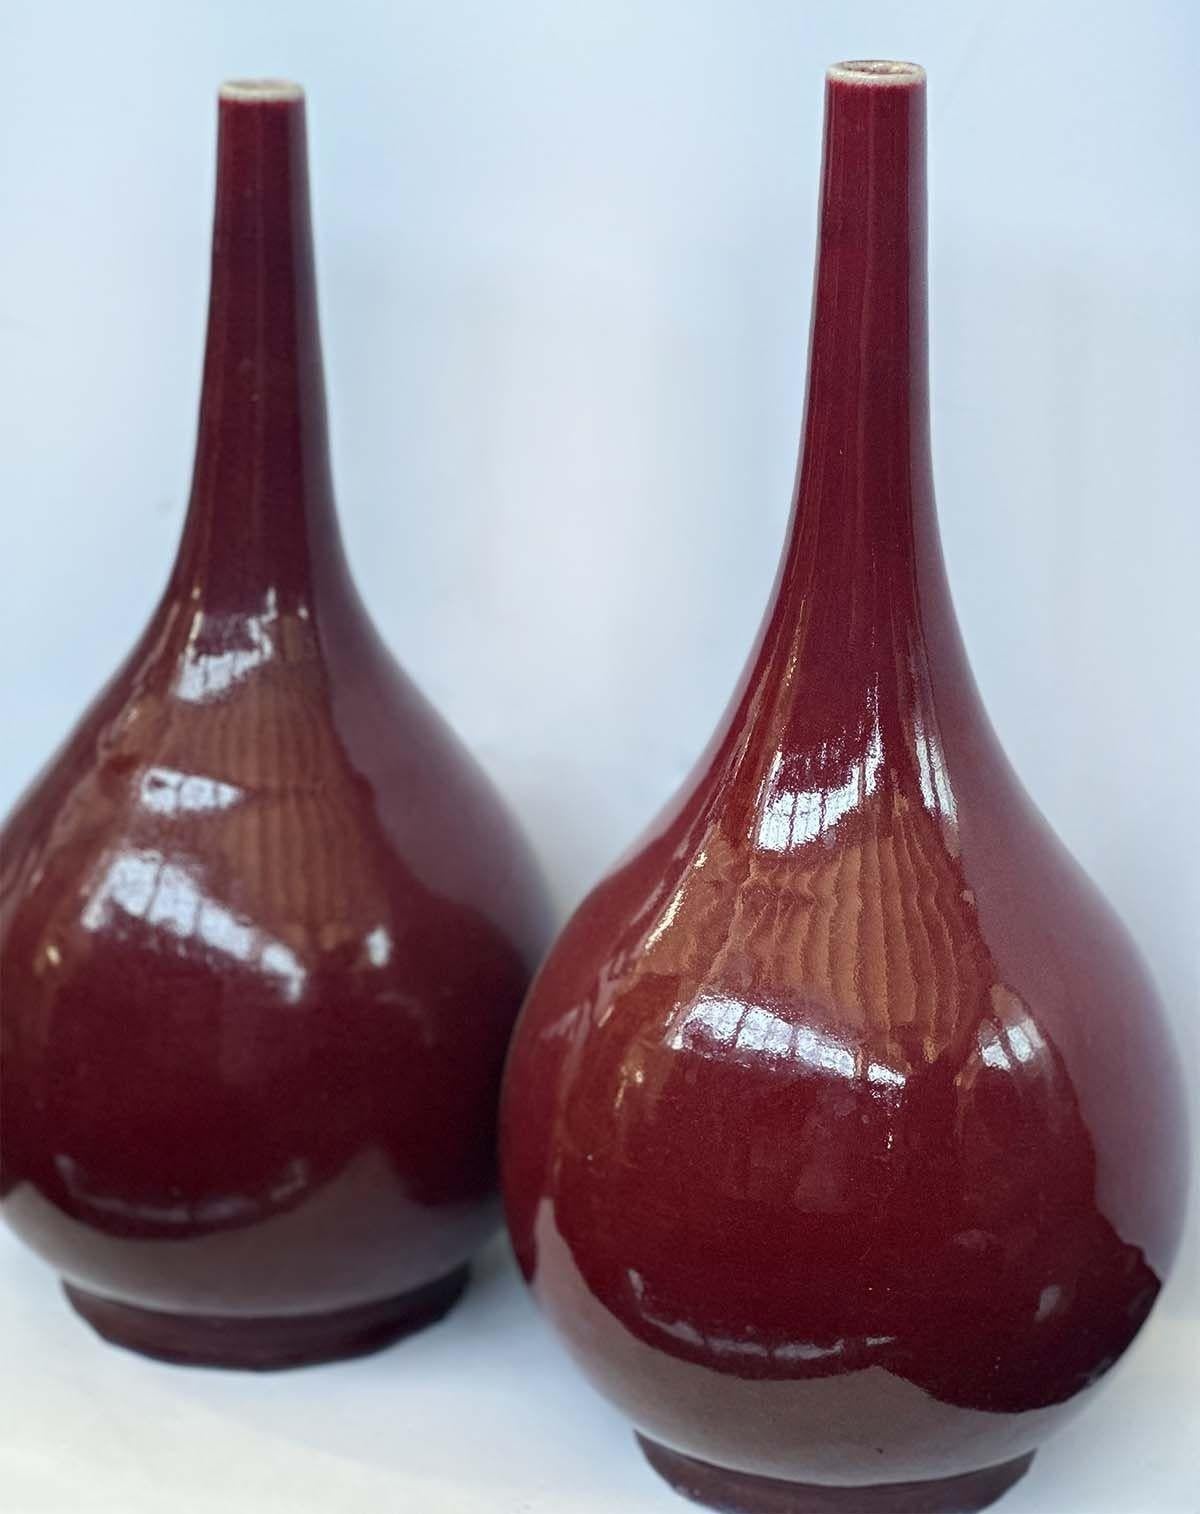 Pair of traditional 20th century Sang de Boeuf vases. Crafted from fine earthenware, each vase boasts a striking deep red glaze, reminiscent of the rich and lustrous hues of 'Sang de Boeuf' or 'Oxblood' glaze, which originated from Chinese ceramics